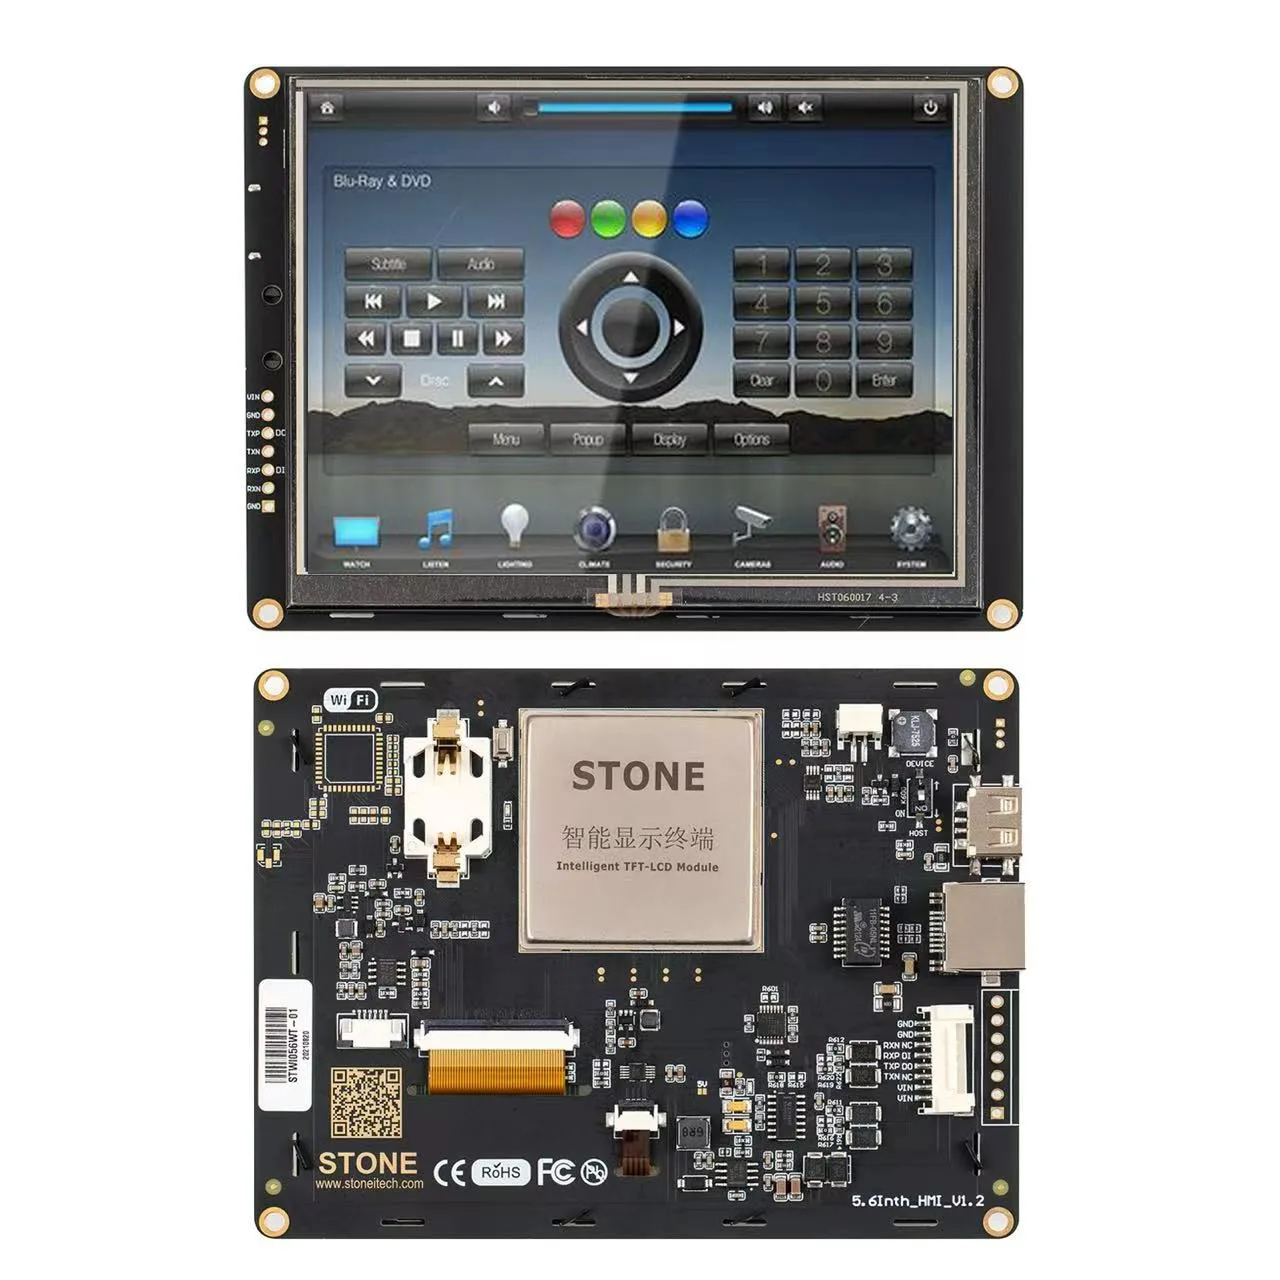 STONE 5.6 Inch TFT LCD Touch Screen with Serial Ports